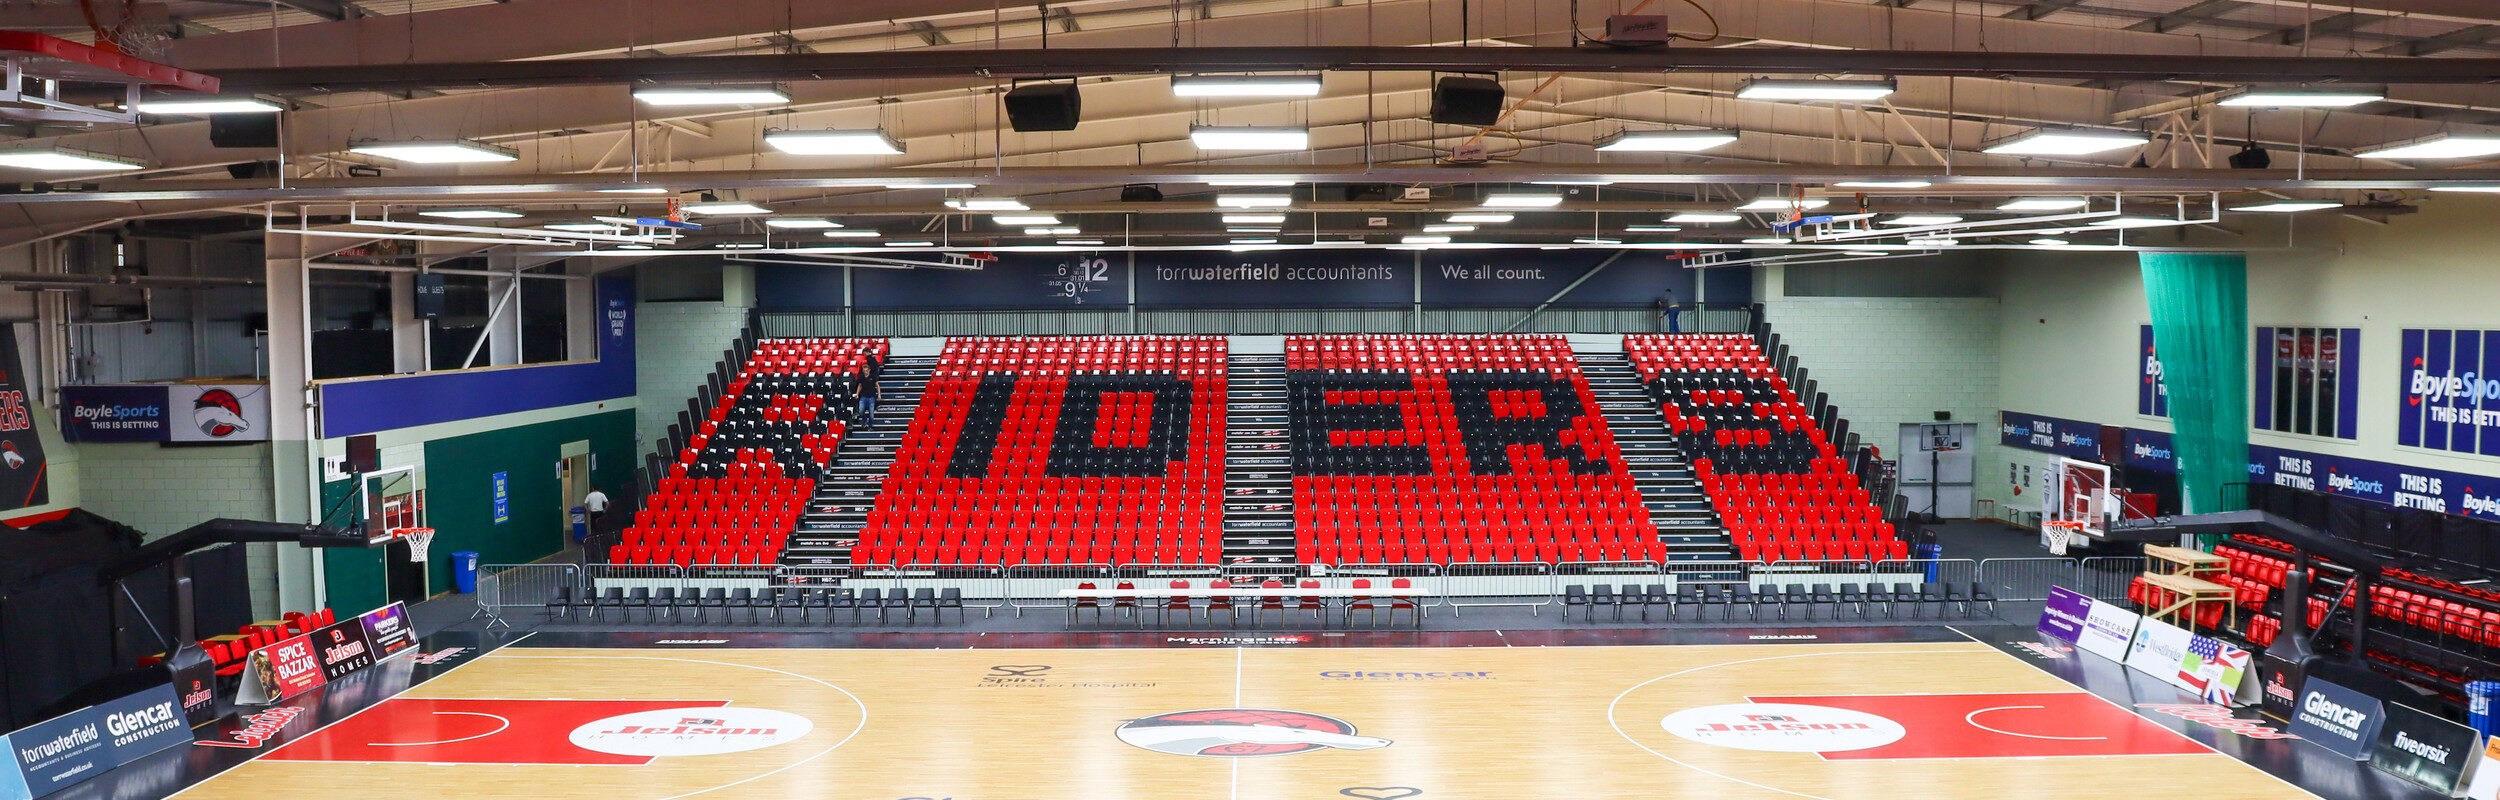 2XL Commercial Finance Announces Sponsorship Deal With The Leicester Riders Basketball Team! 